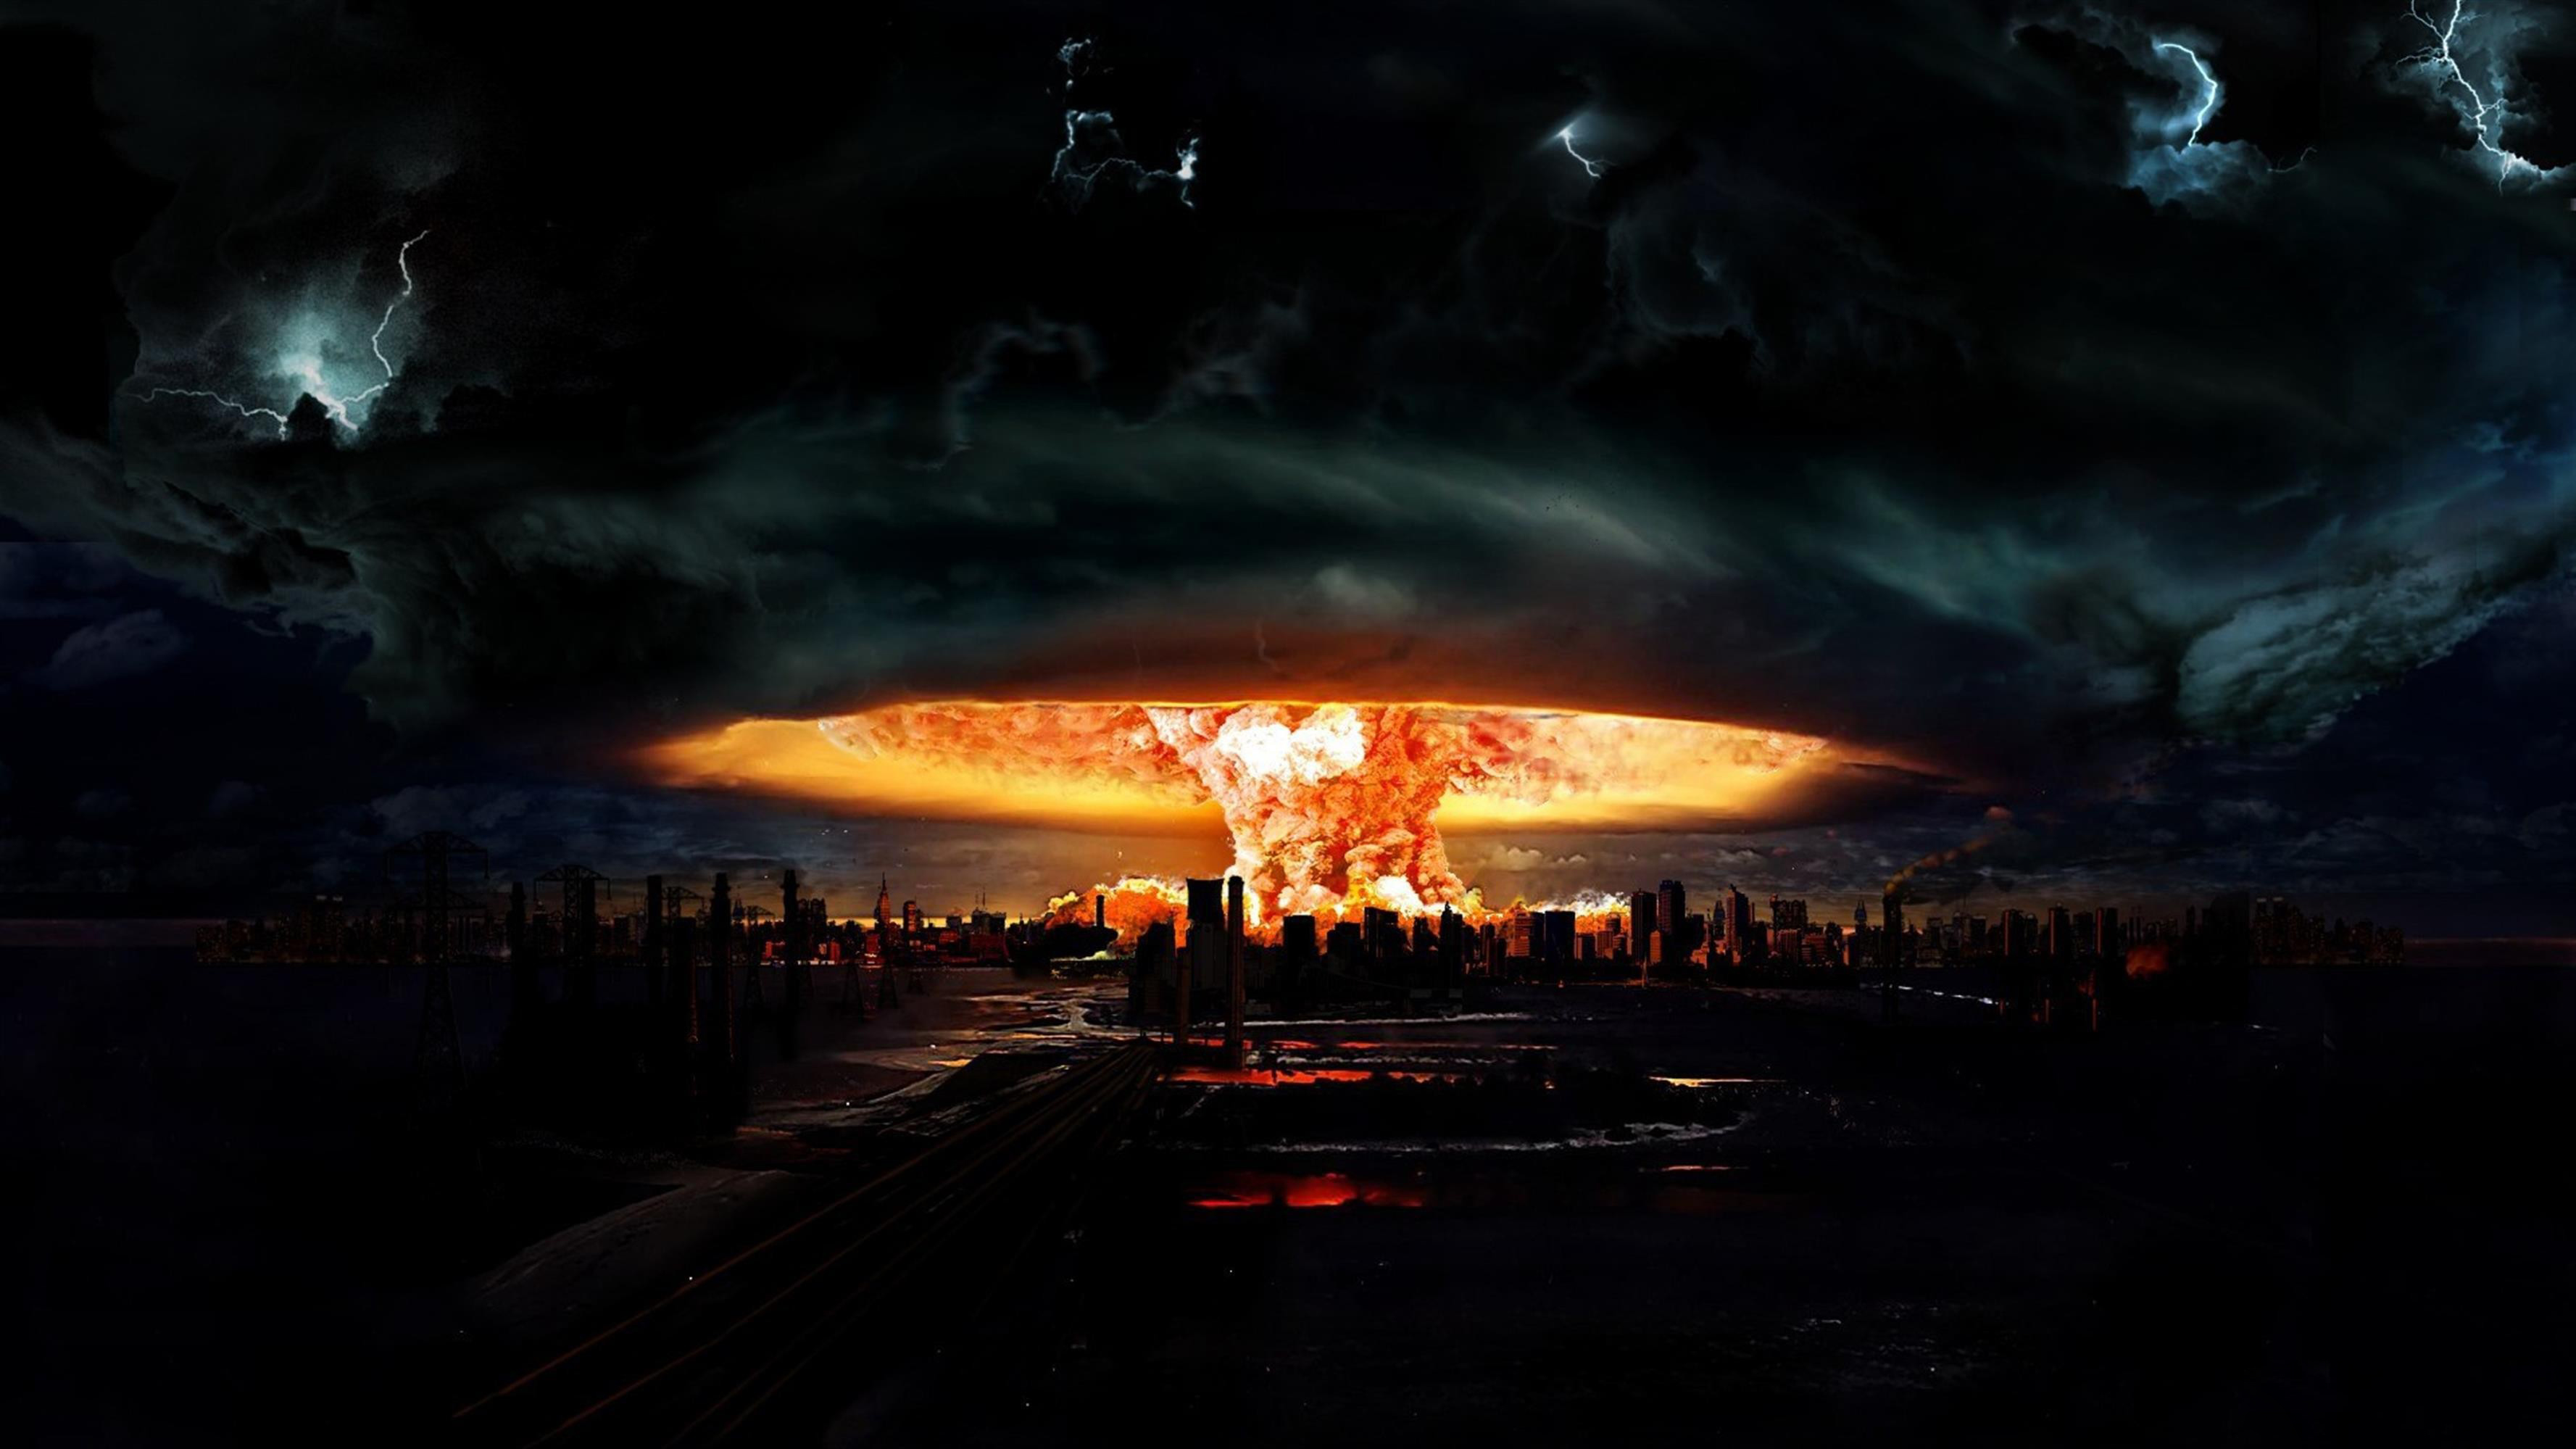 Nuclear Explosion Wallpaper Hd